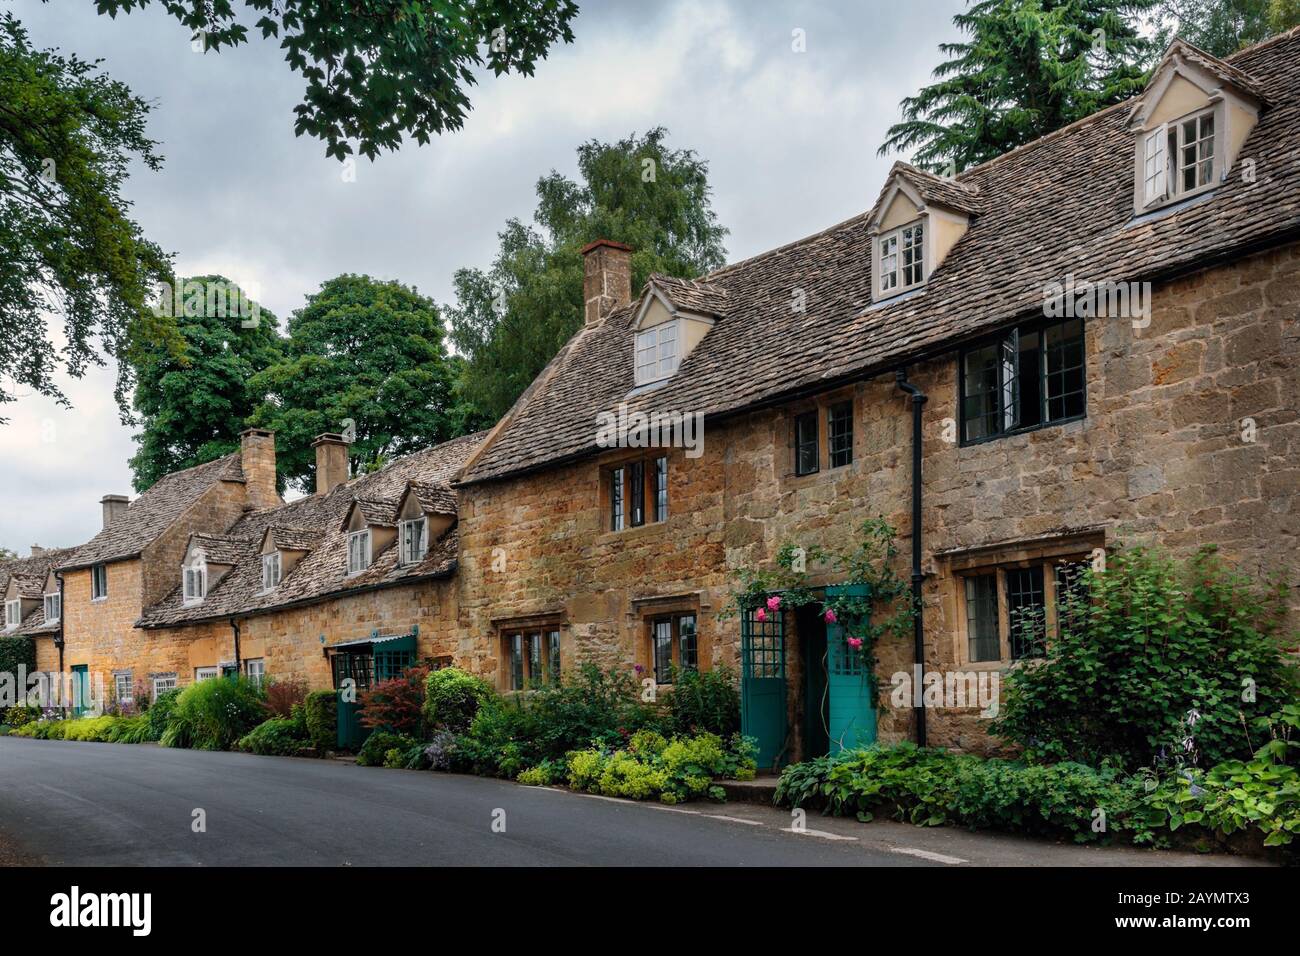 a picturesque row of Cotswold stone cottages in the village of Snowshill, Cotswolds, Gloucestershire, England, Uk Stock Photo